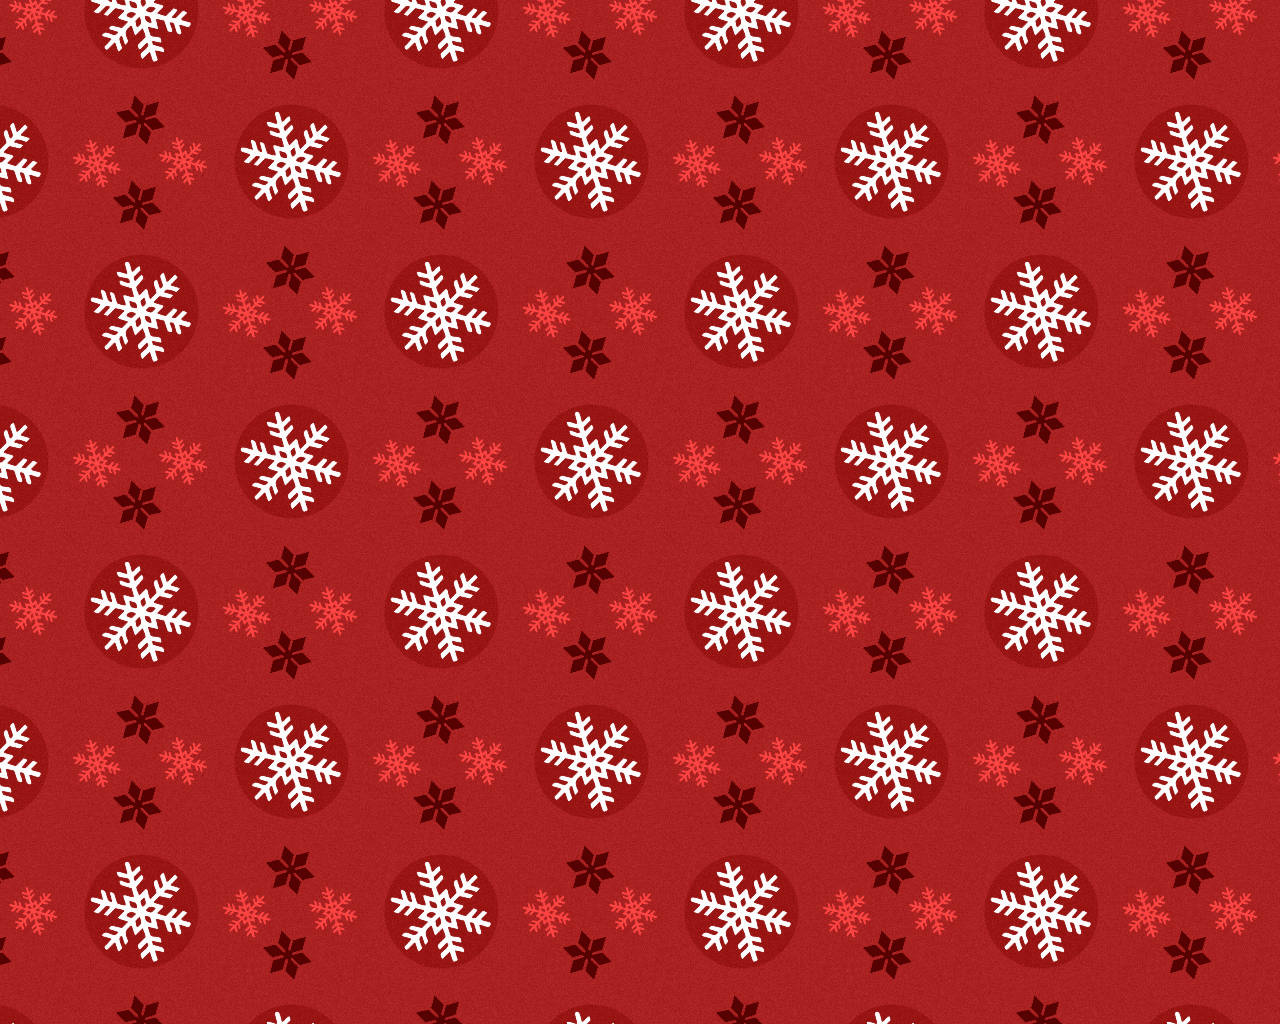 Snowflakes Patterned Red Christmas Background